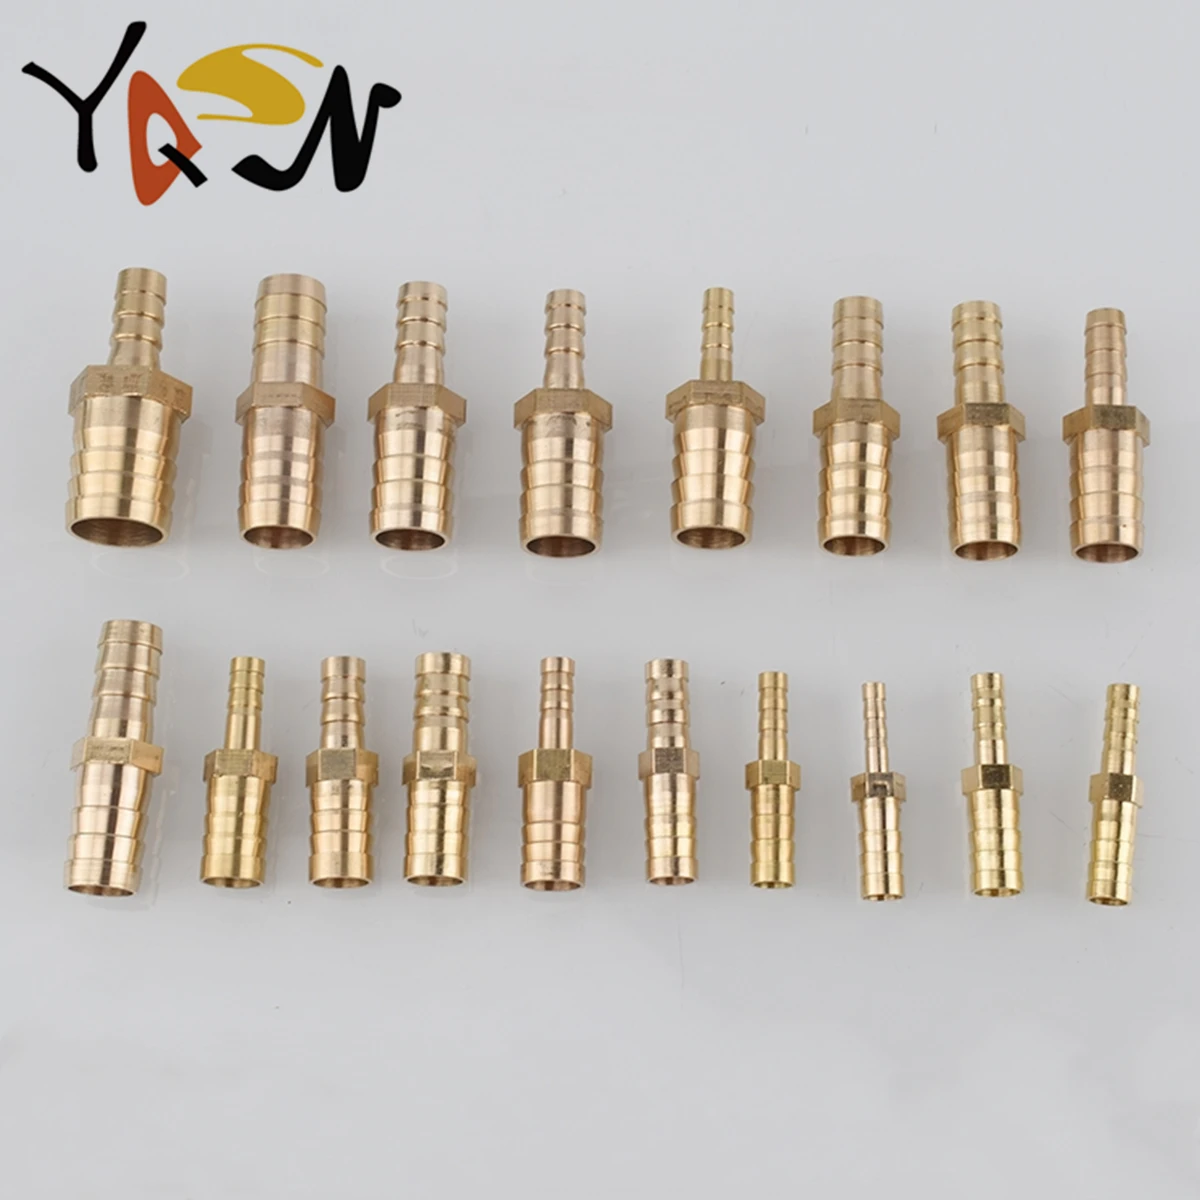 1PC Pagoda 4 5 6 8 10 12 14 16 18 19 20mm Brass Pneumatic Tower Hose Barb Straight Pipe Fitting Through Oil Water Gas Adapter